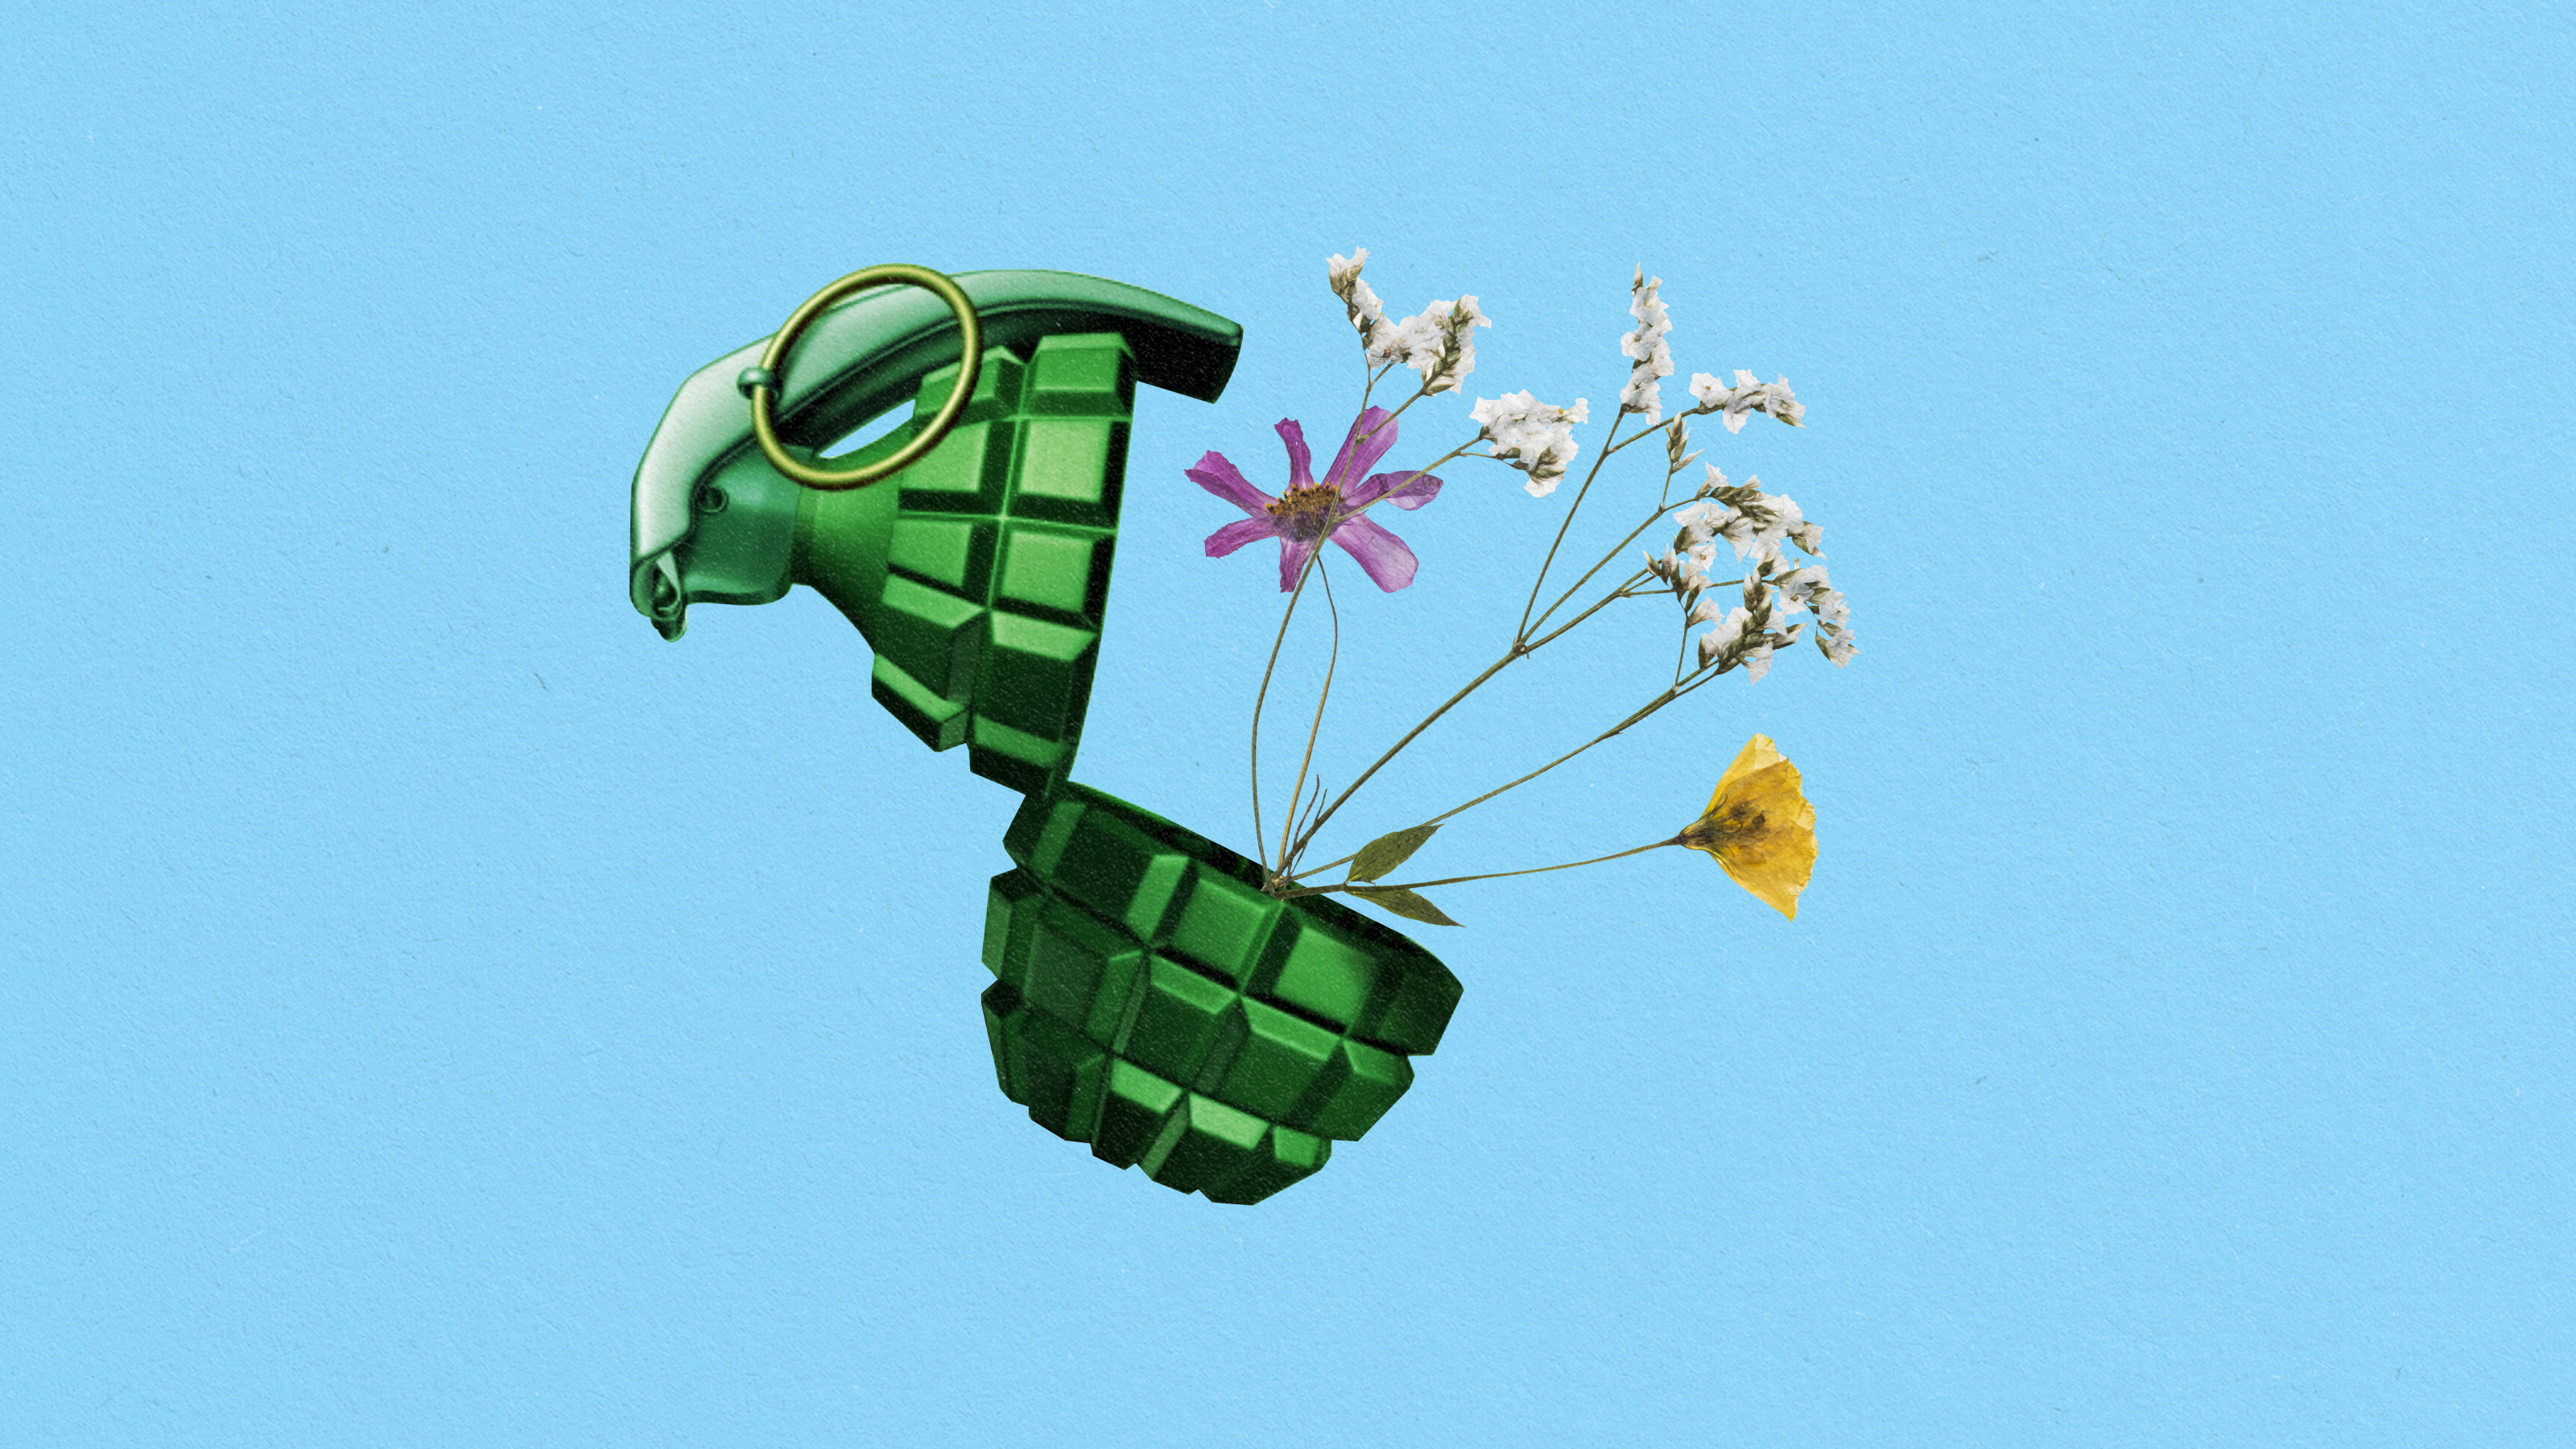 A pacifist's explosive, adorned with blooming flowers.